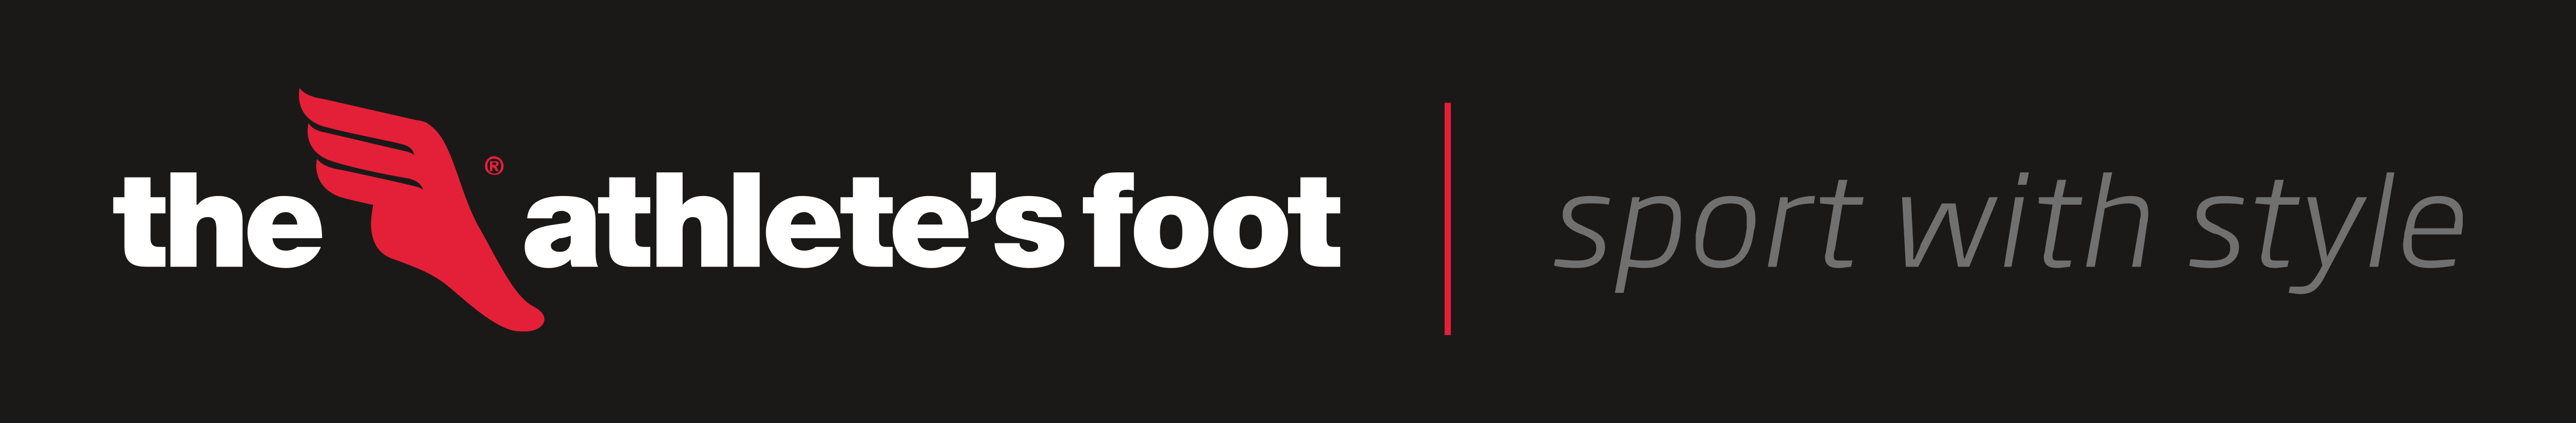 The Athlete's Foot – Logos Download